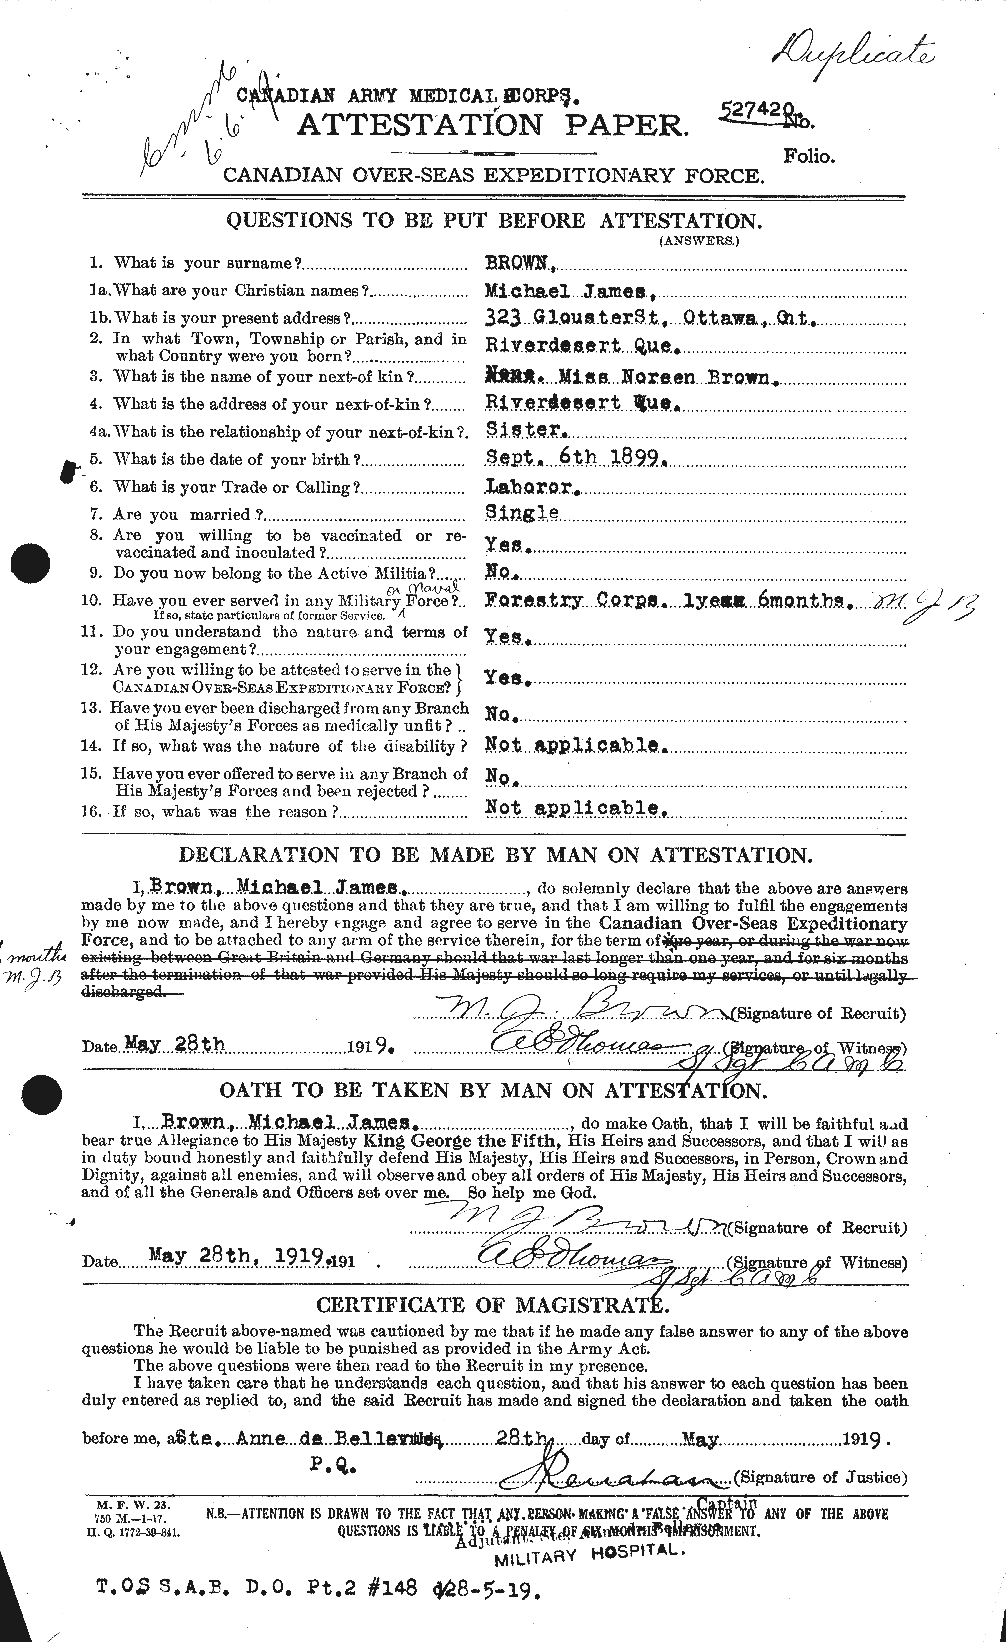 Personnel Records of the First World War - CEF 267062a